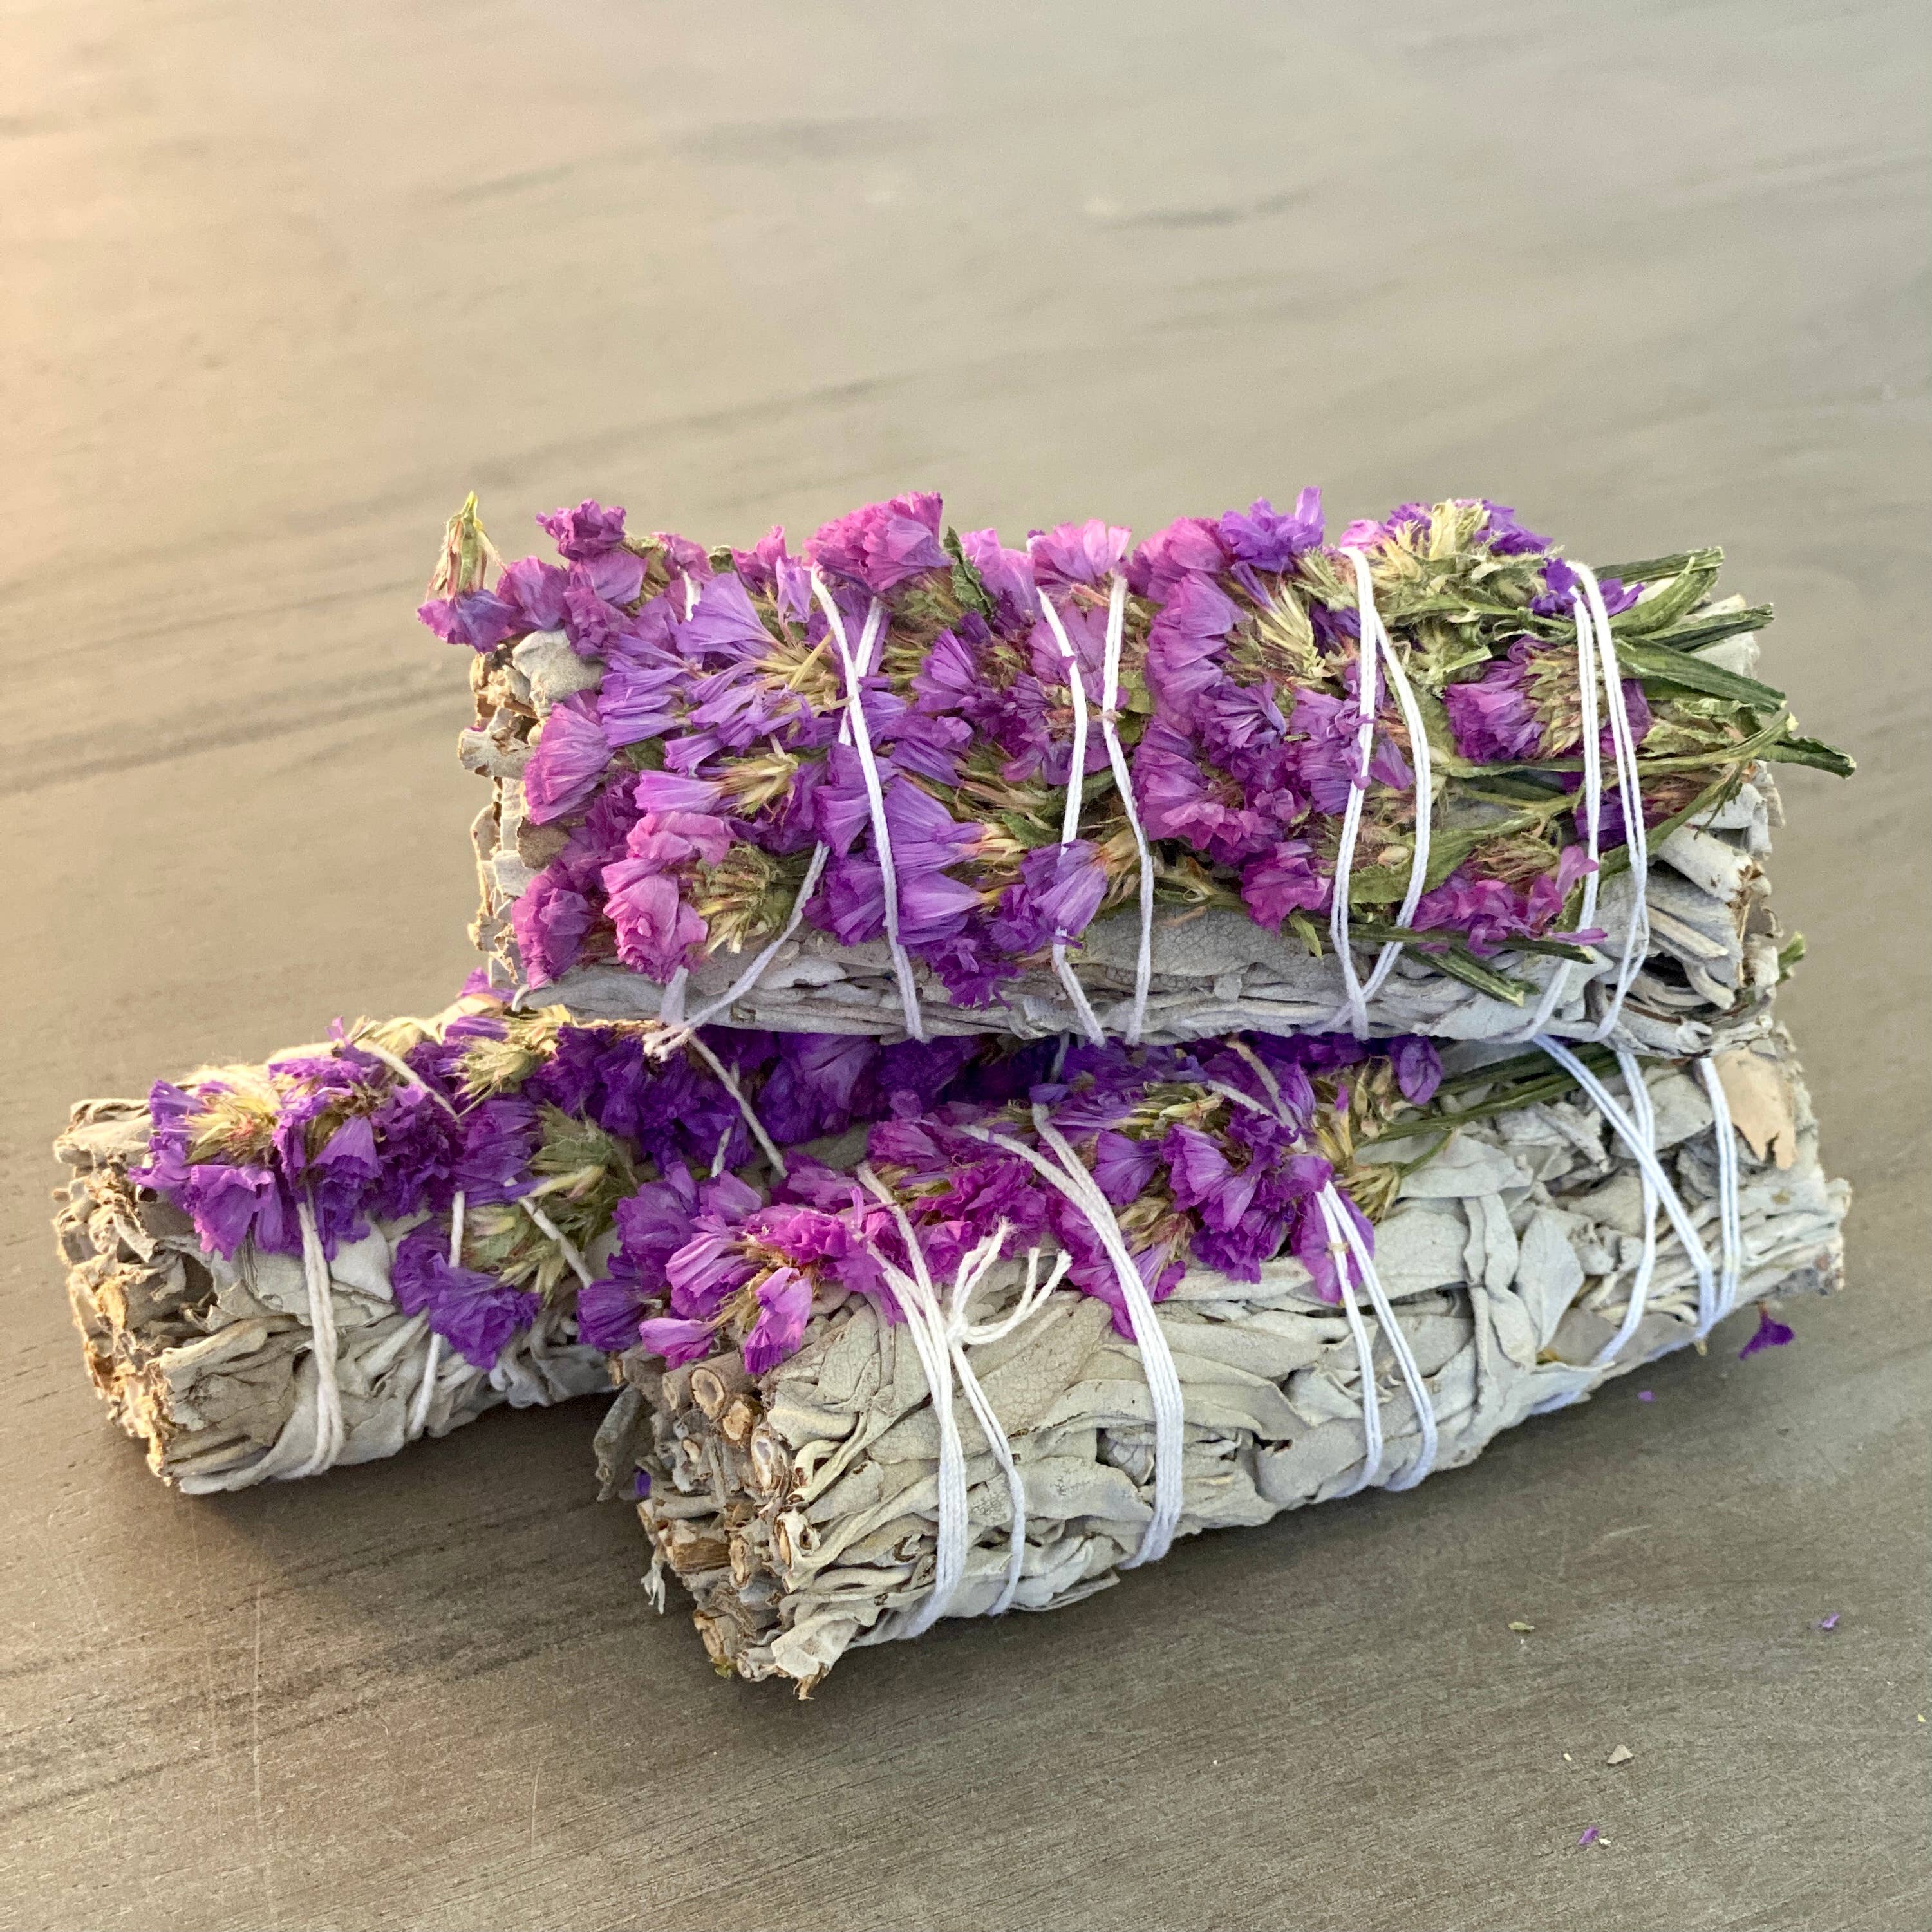 White Sage Smudge Stick with Purple Flowers